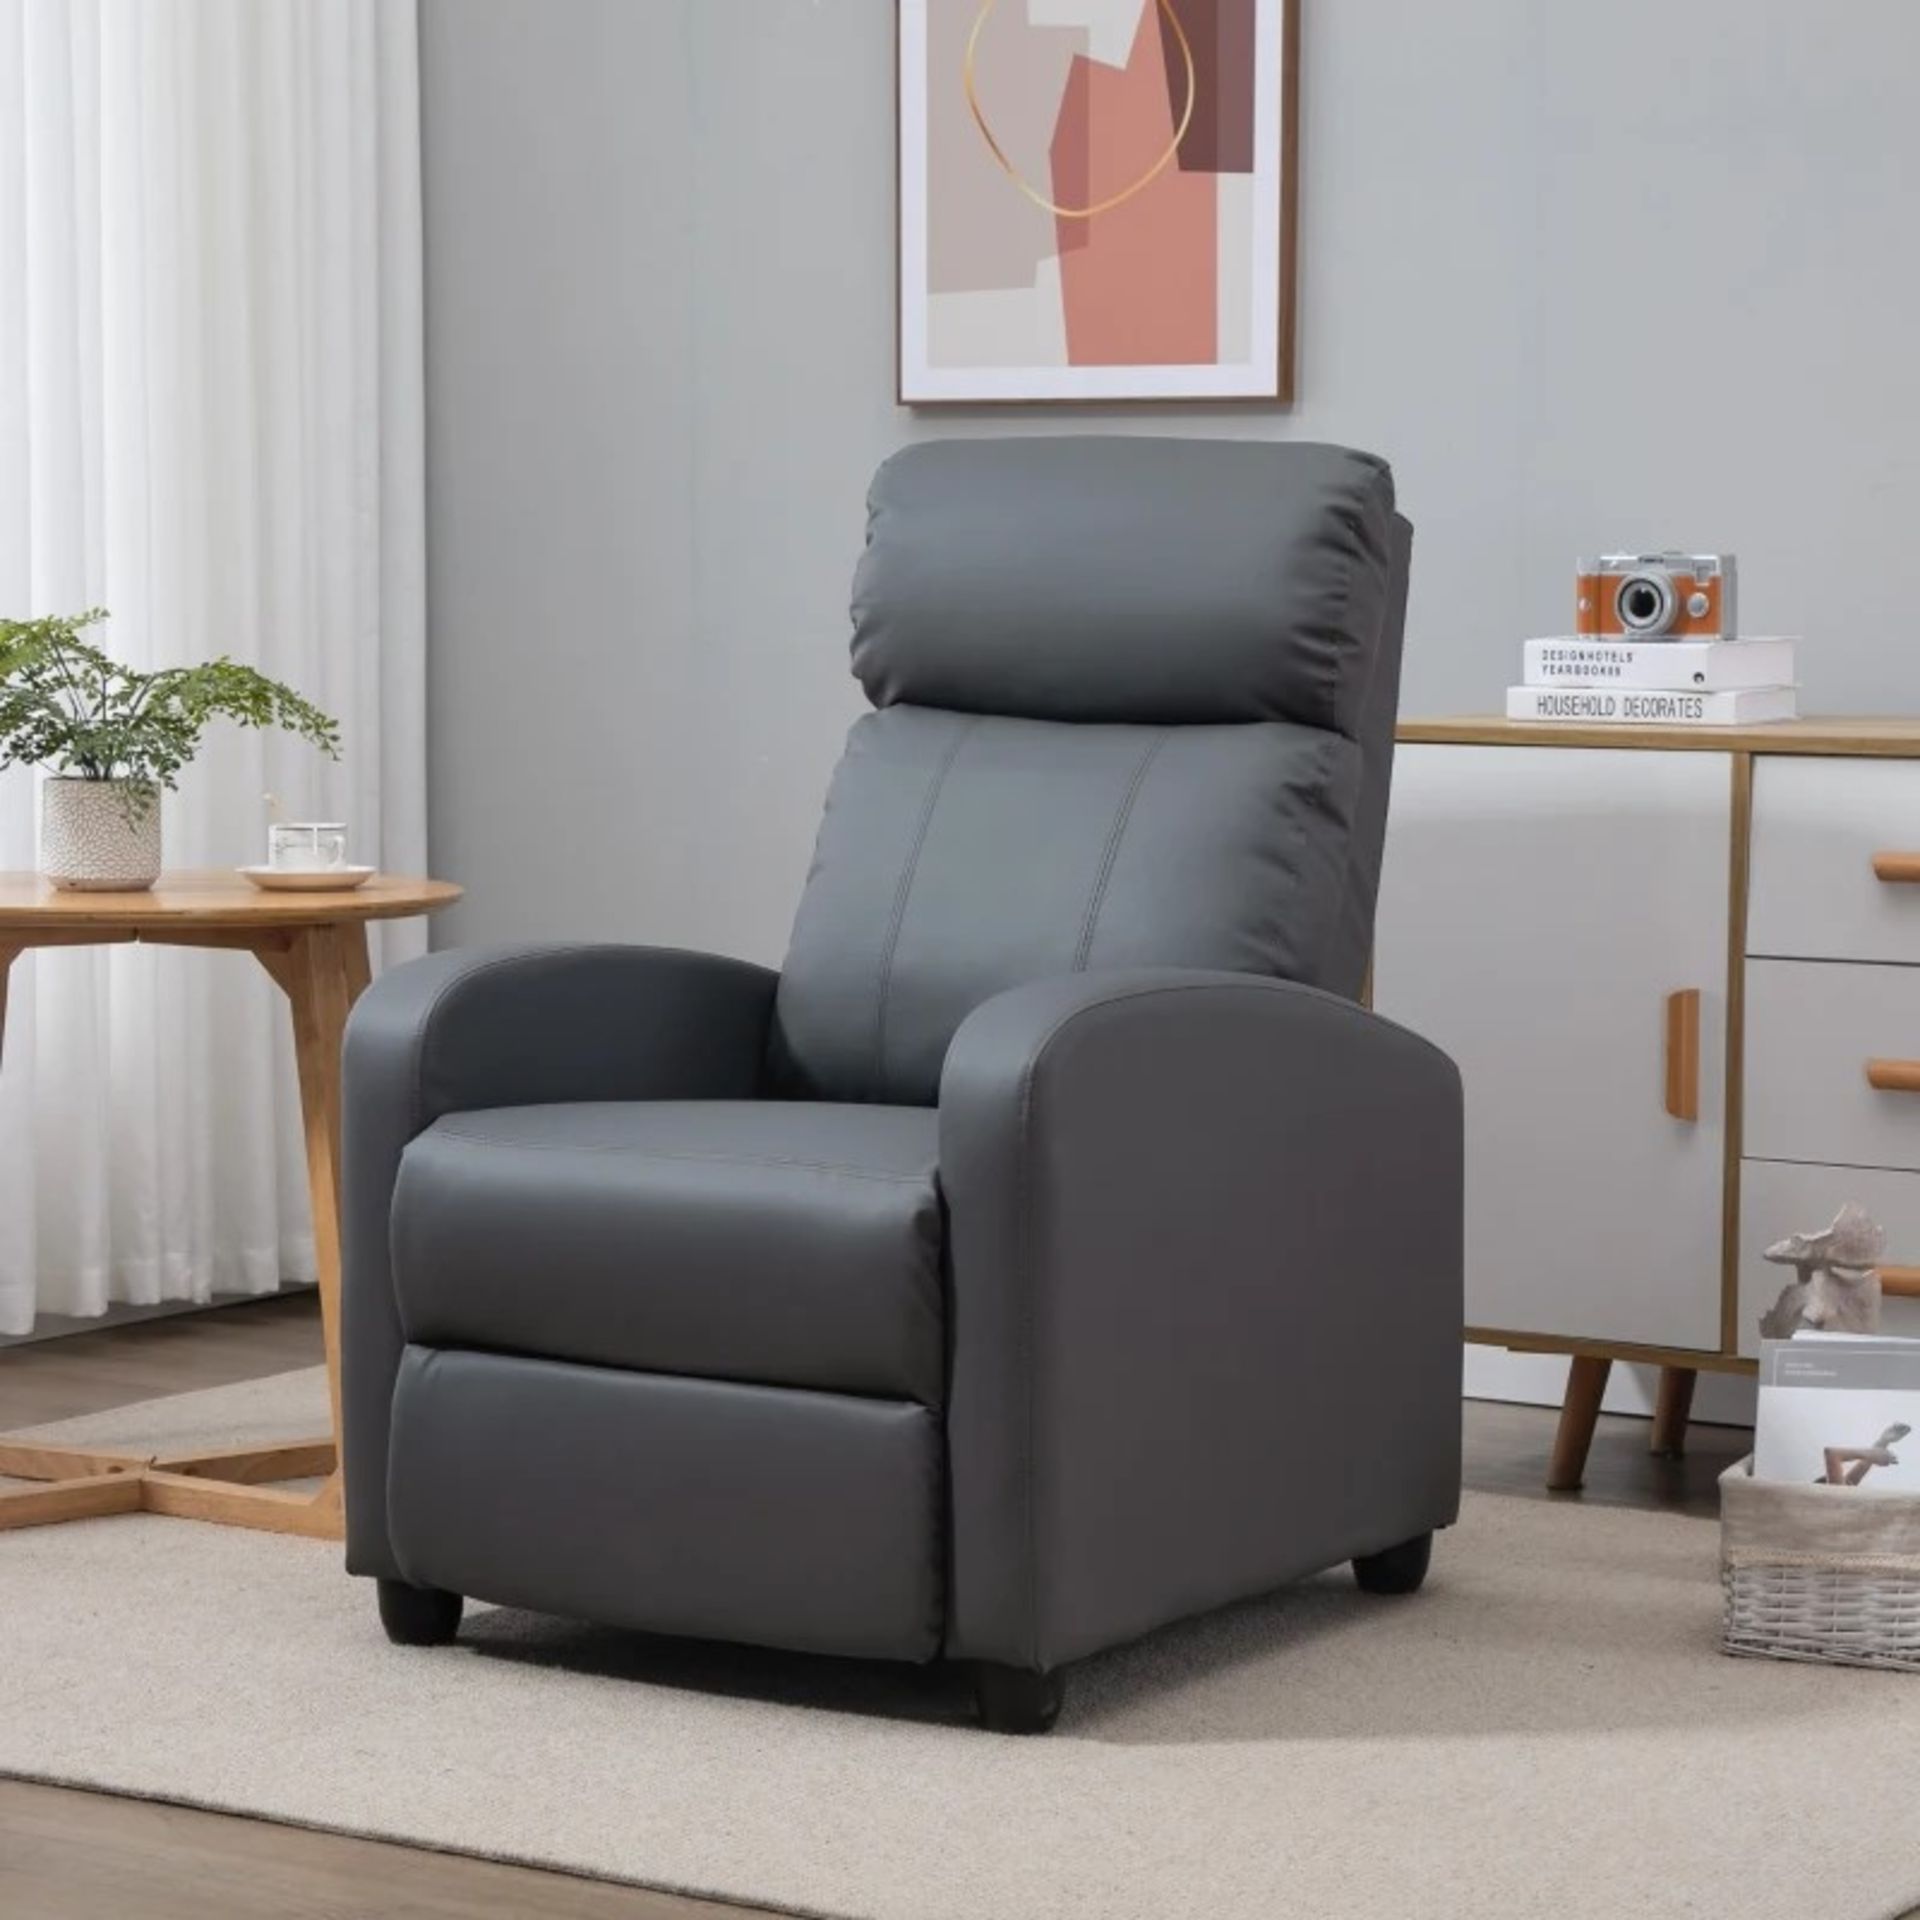 RRPP £254.99 - Recliner Sofa Chair PU Leather Massage Armcair w/ Remote Control, Grey - Image 2 of 6